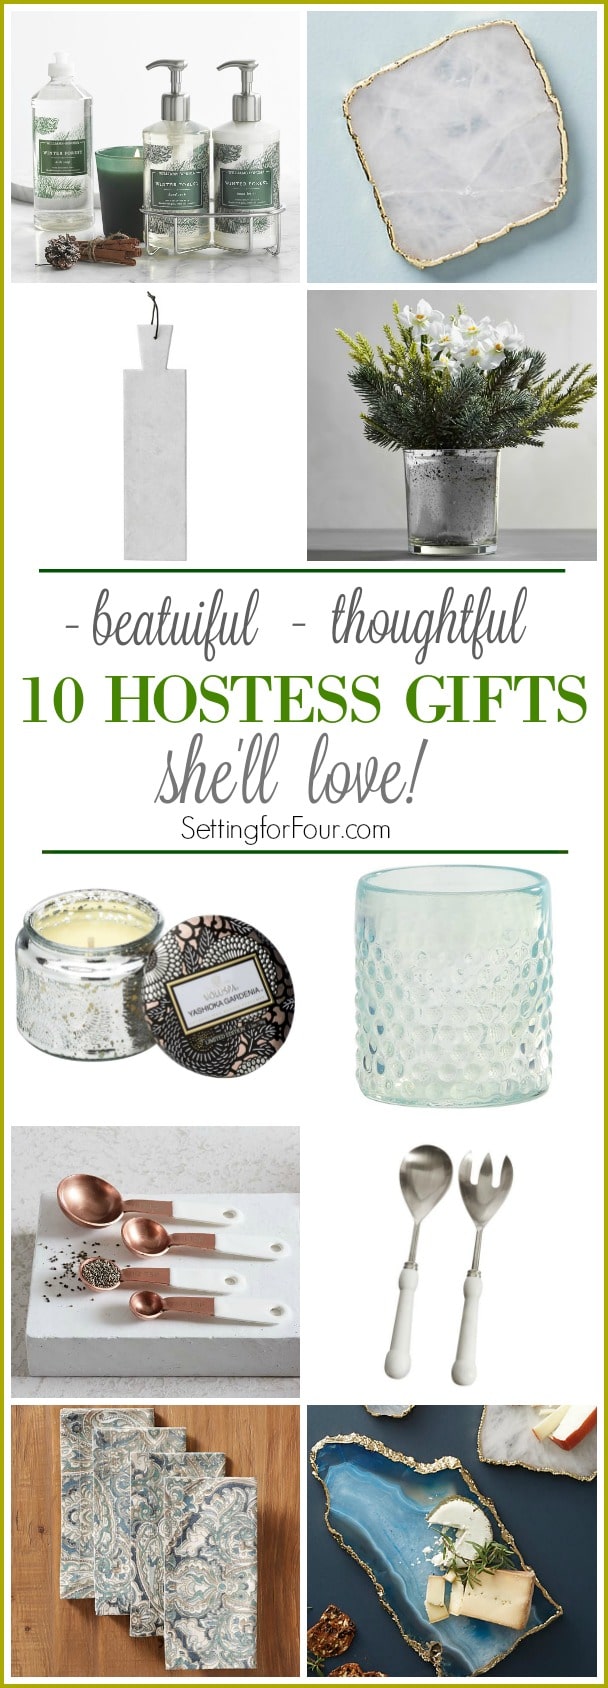 Need to pick up a hostess gift for the holidays to wow the hostess? Check out these 10 Beautiful Hostess Gift Ideas She'll Love! Being a great guest means being thoughtful and appreciative of the invite. Give her a beautiful hostess gift that she'll love - You'll want one for yourself too! These also make great stocking stuffer ideas, so pick up a few for the holidays and stash away to gift later!